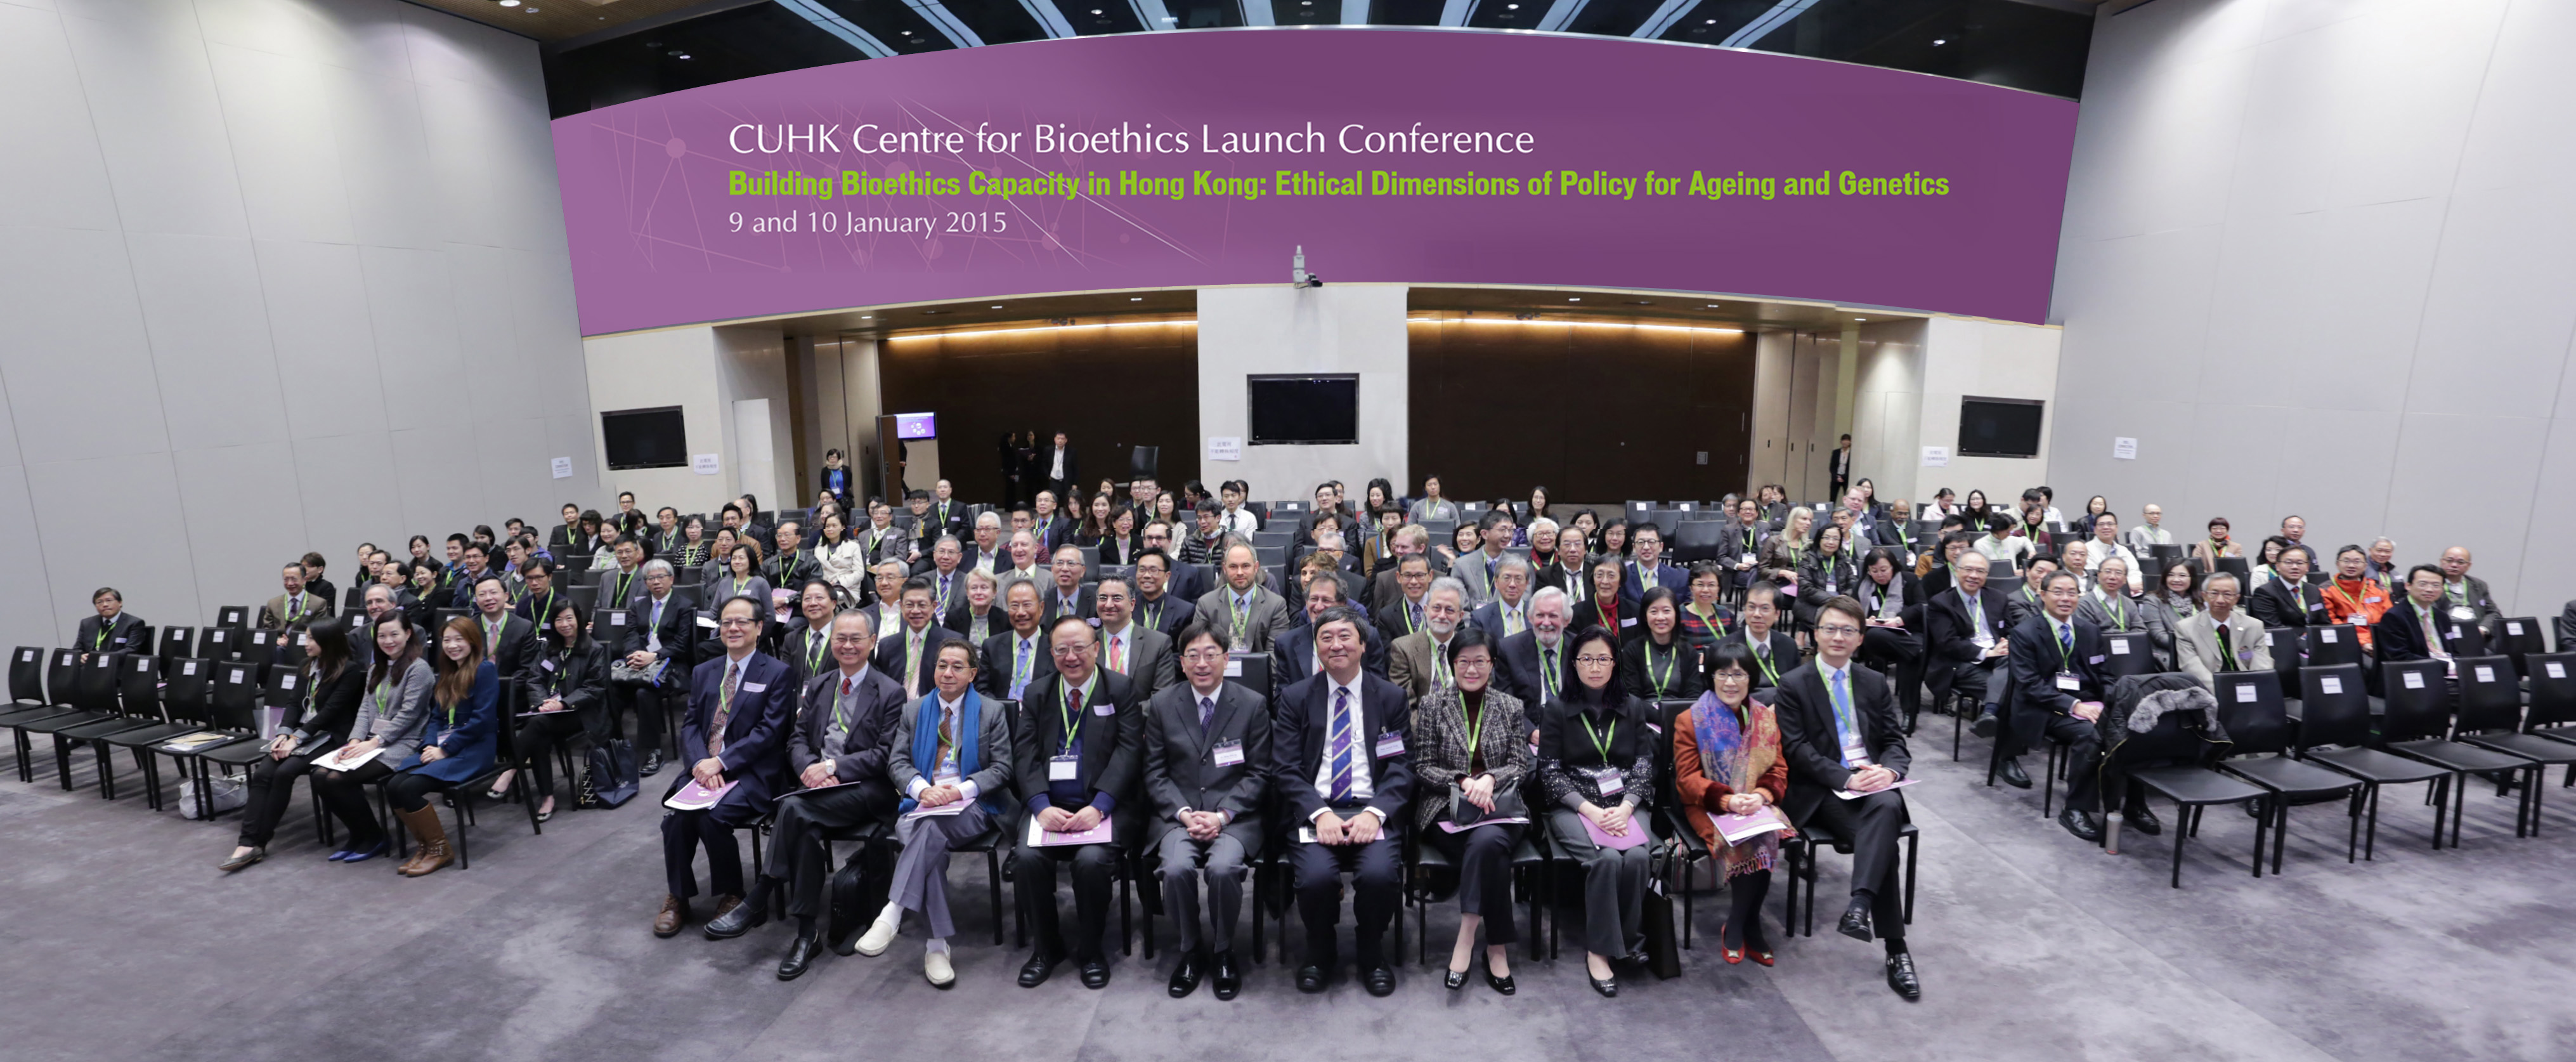 A group photo of the guests of honor, speakers and participants of CUHK Centre for Bioethics Launch Conference.